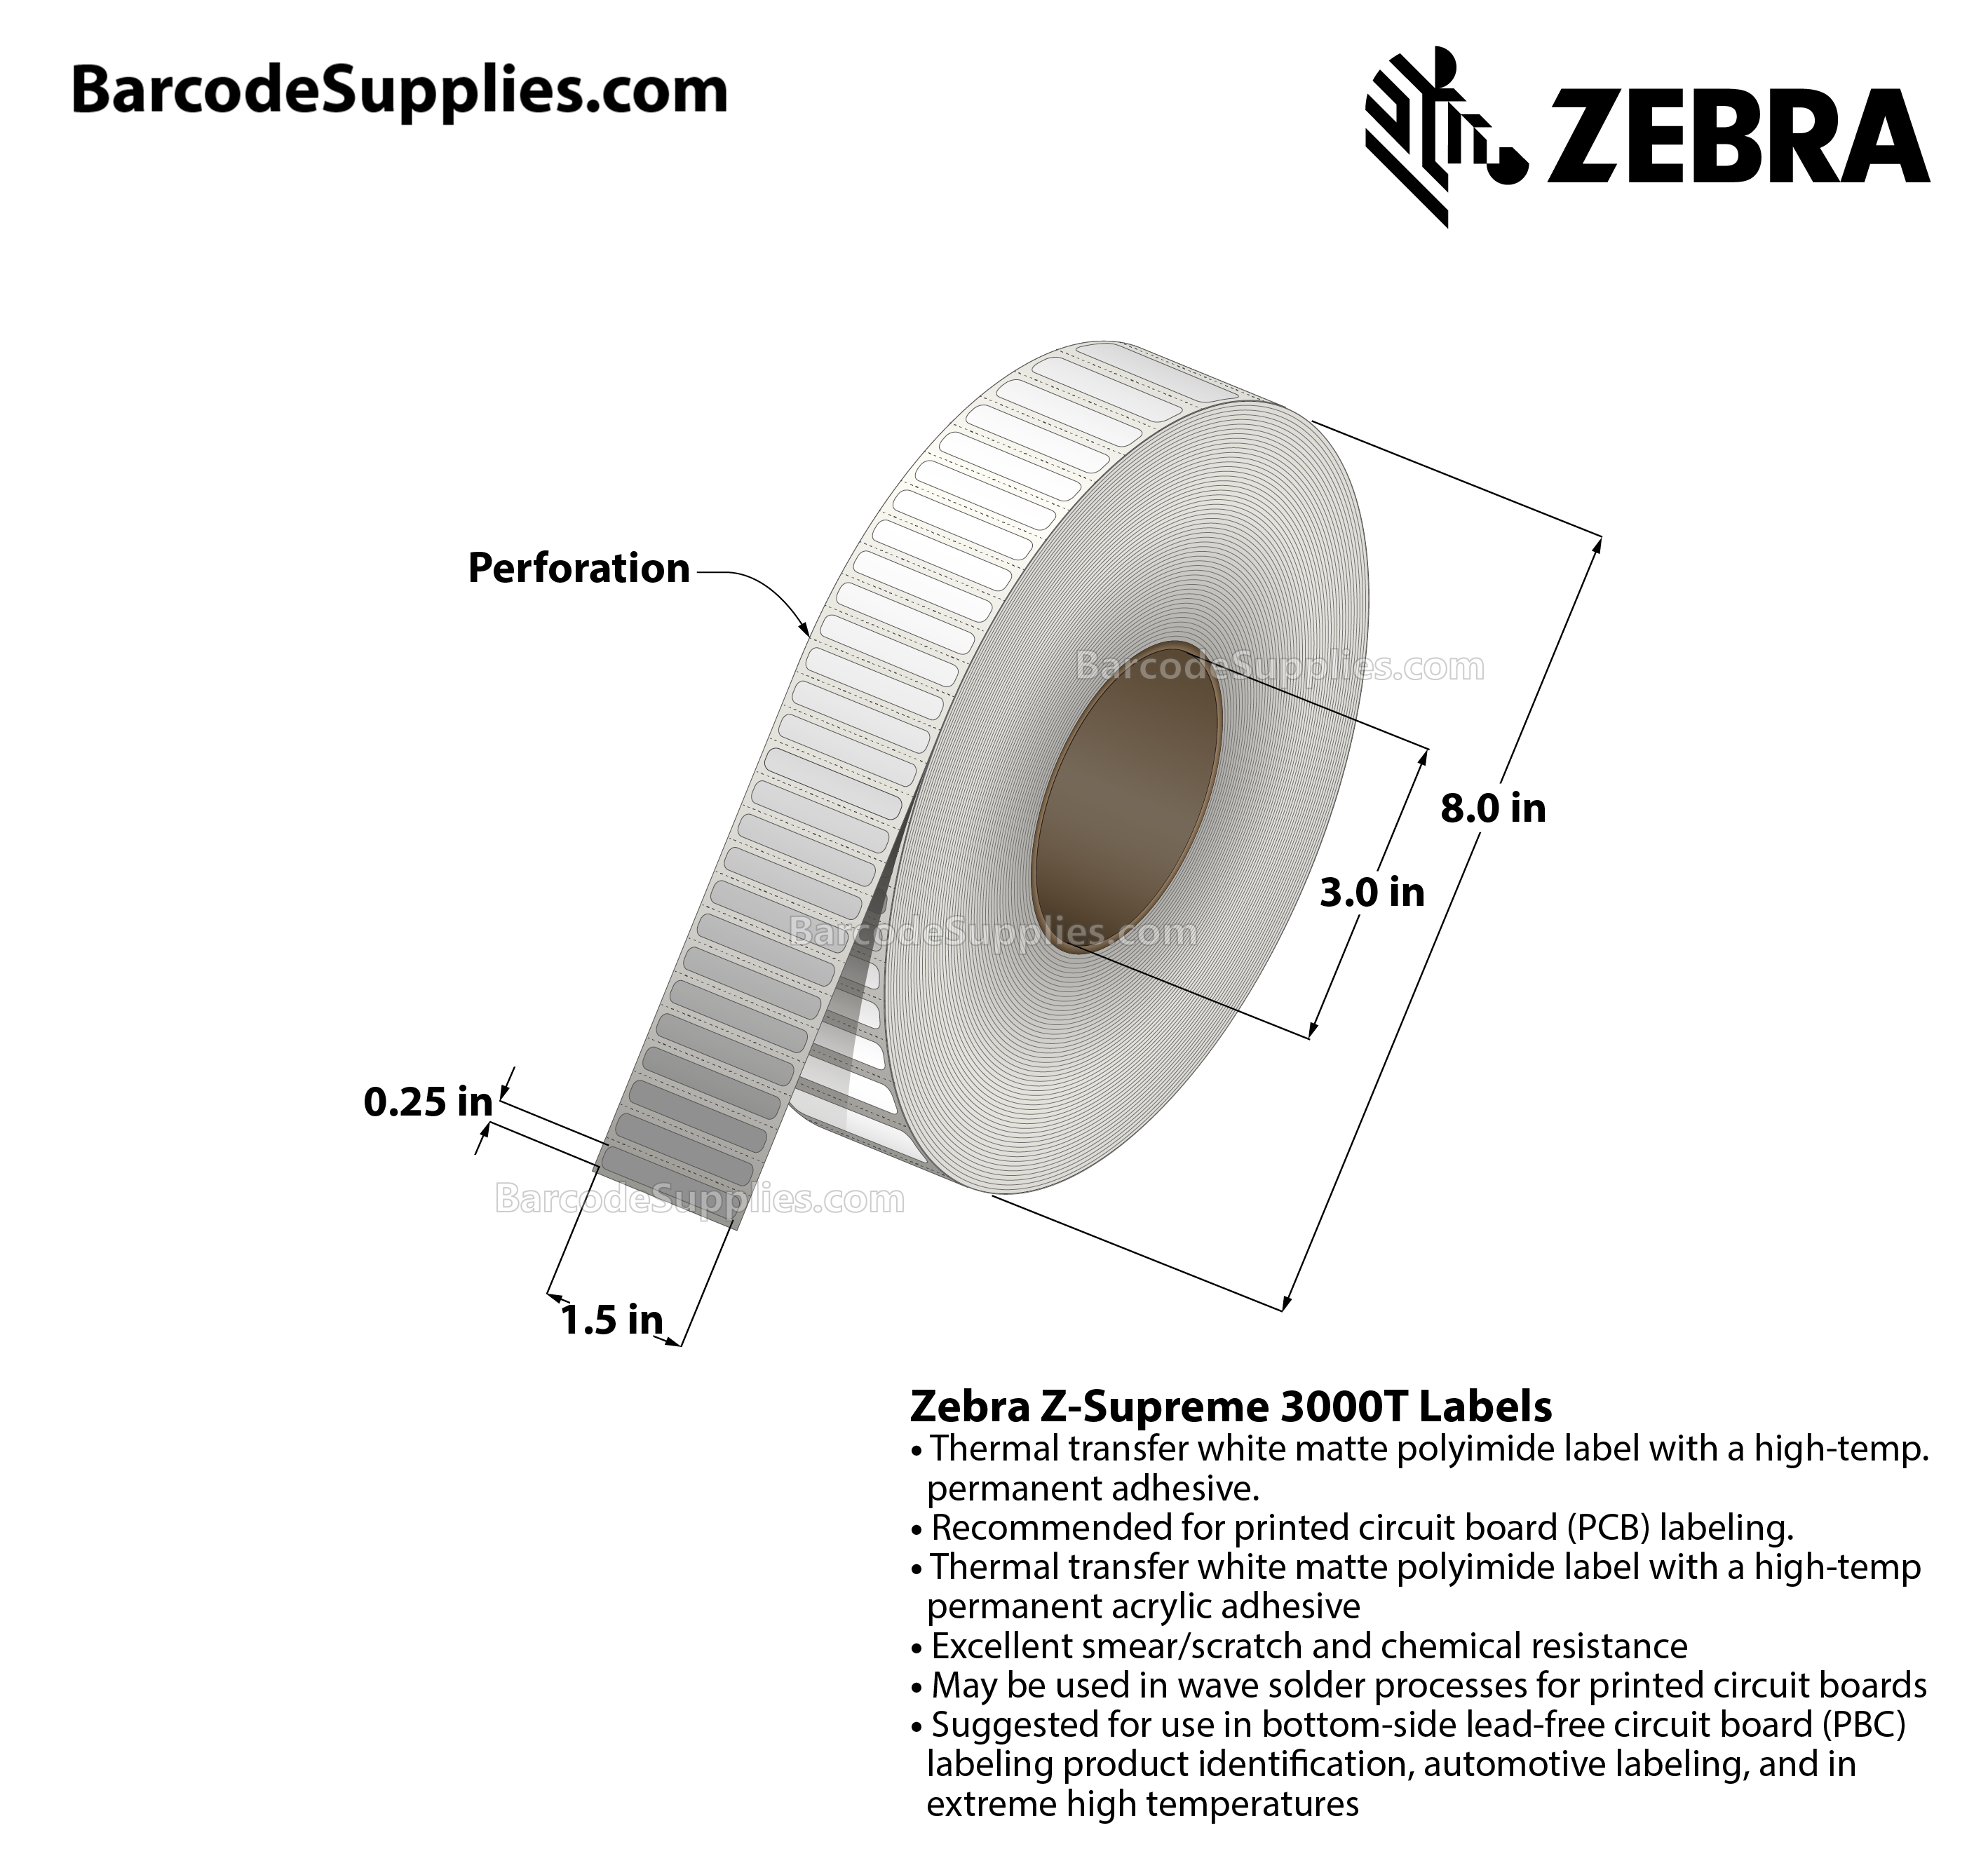 1.5 x 0.25 Thermal Transfer White Z-Supreme 3000T Labels With High-temp Adhesive - Perforated - 10000 Labels Per Roll - Carton Of 1 Rolls - 10000 Labels Total - MPN: 10023307